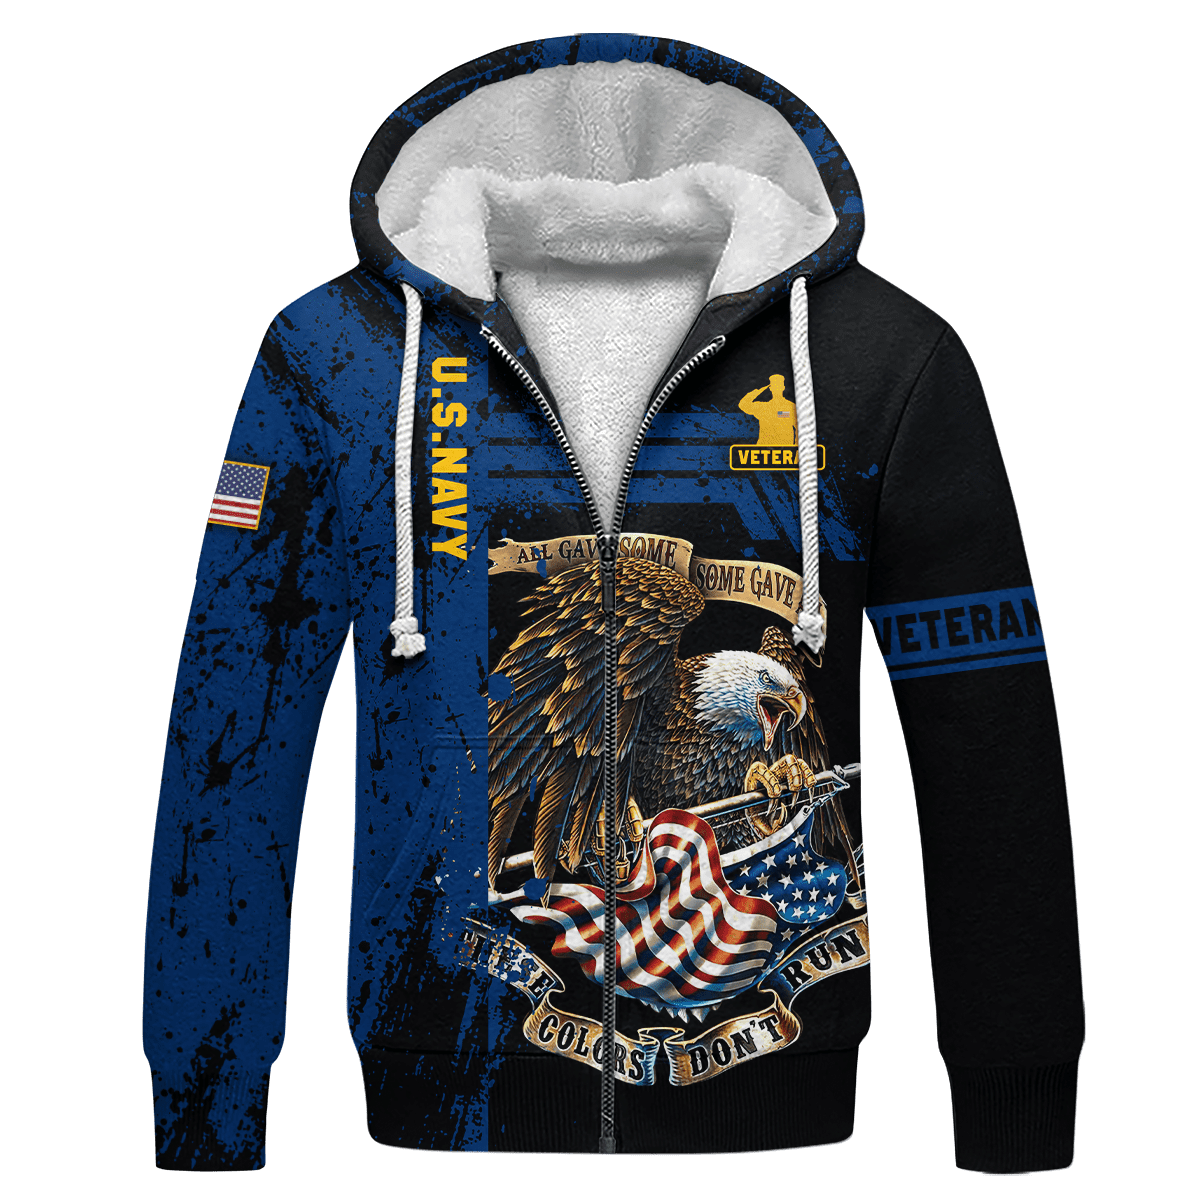 US Navy - All Gave Some Some Gave All Zip Hoodie